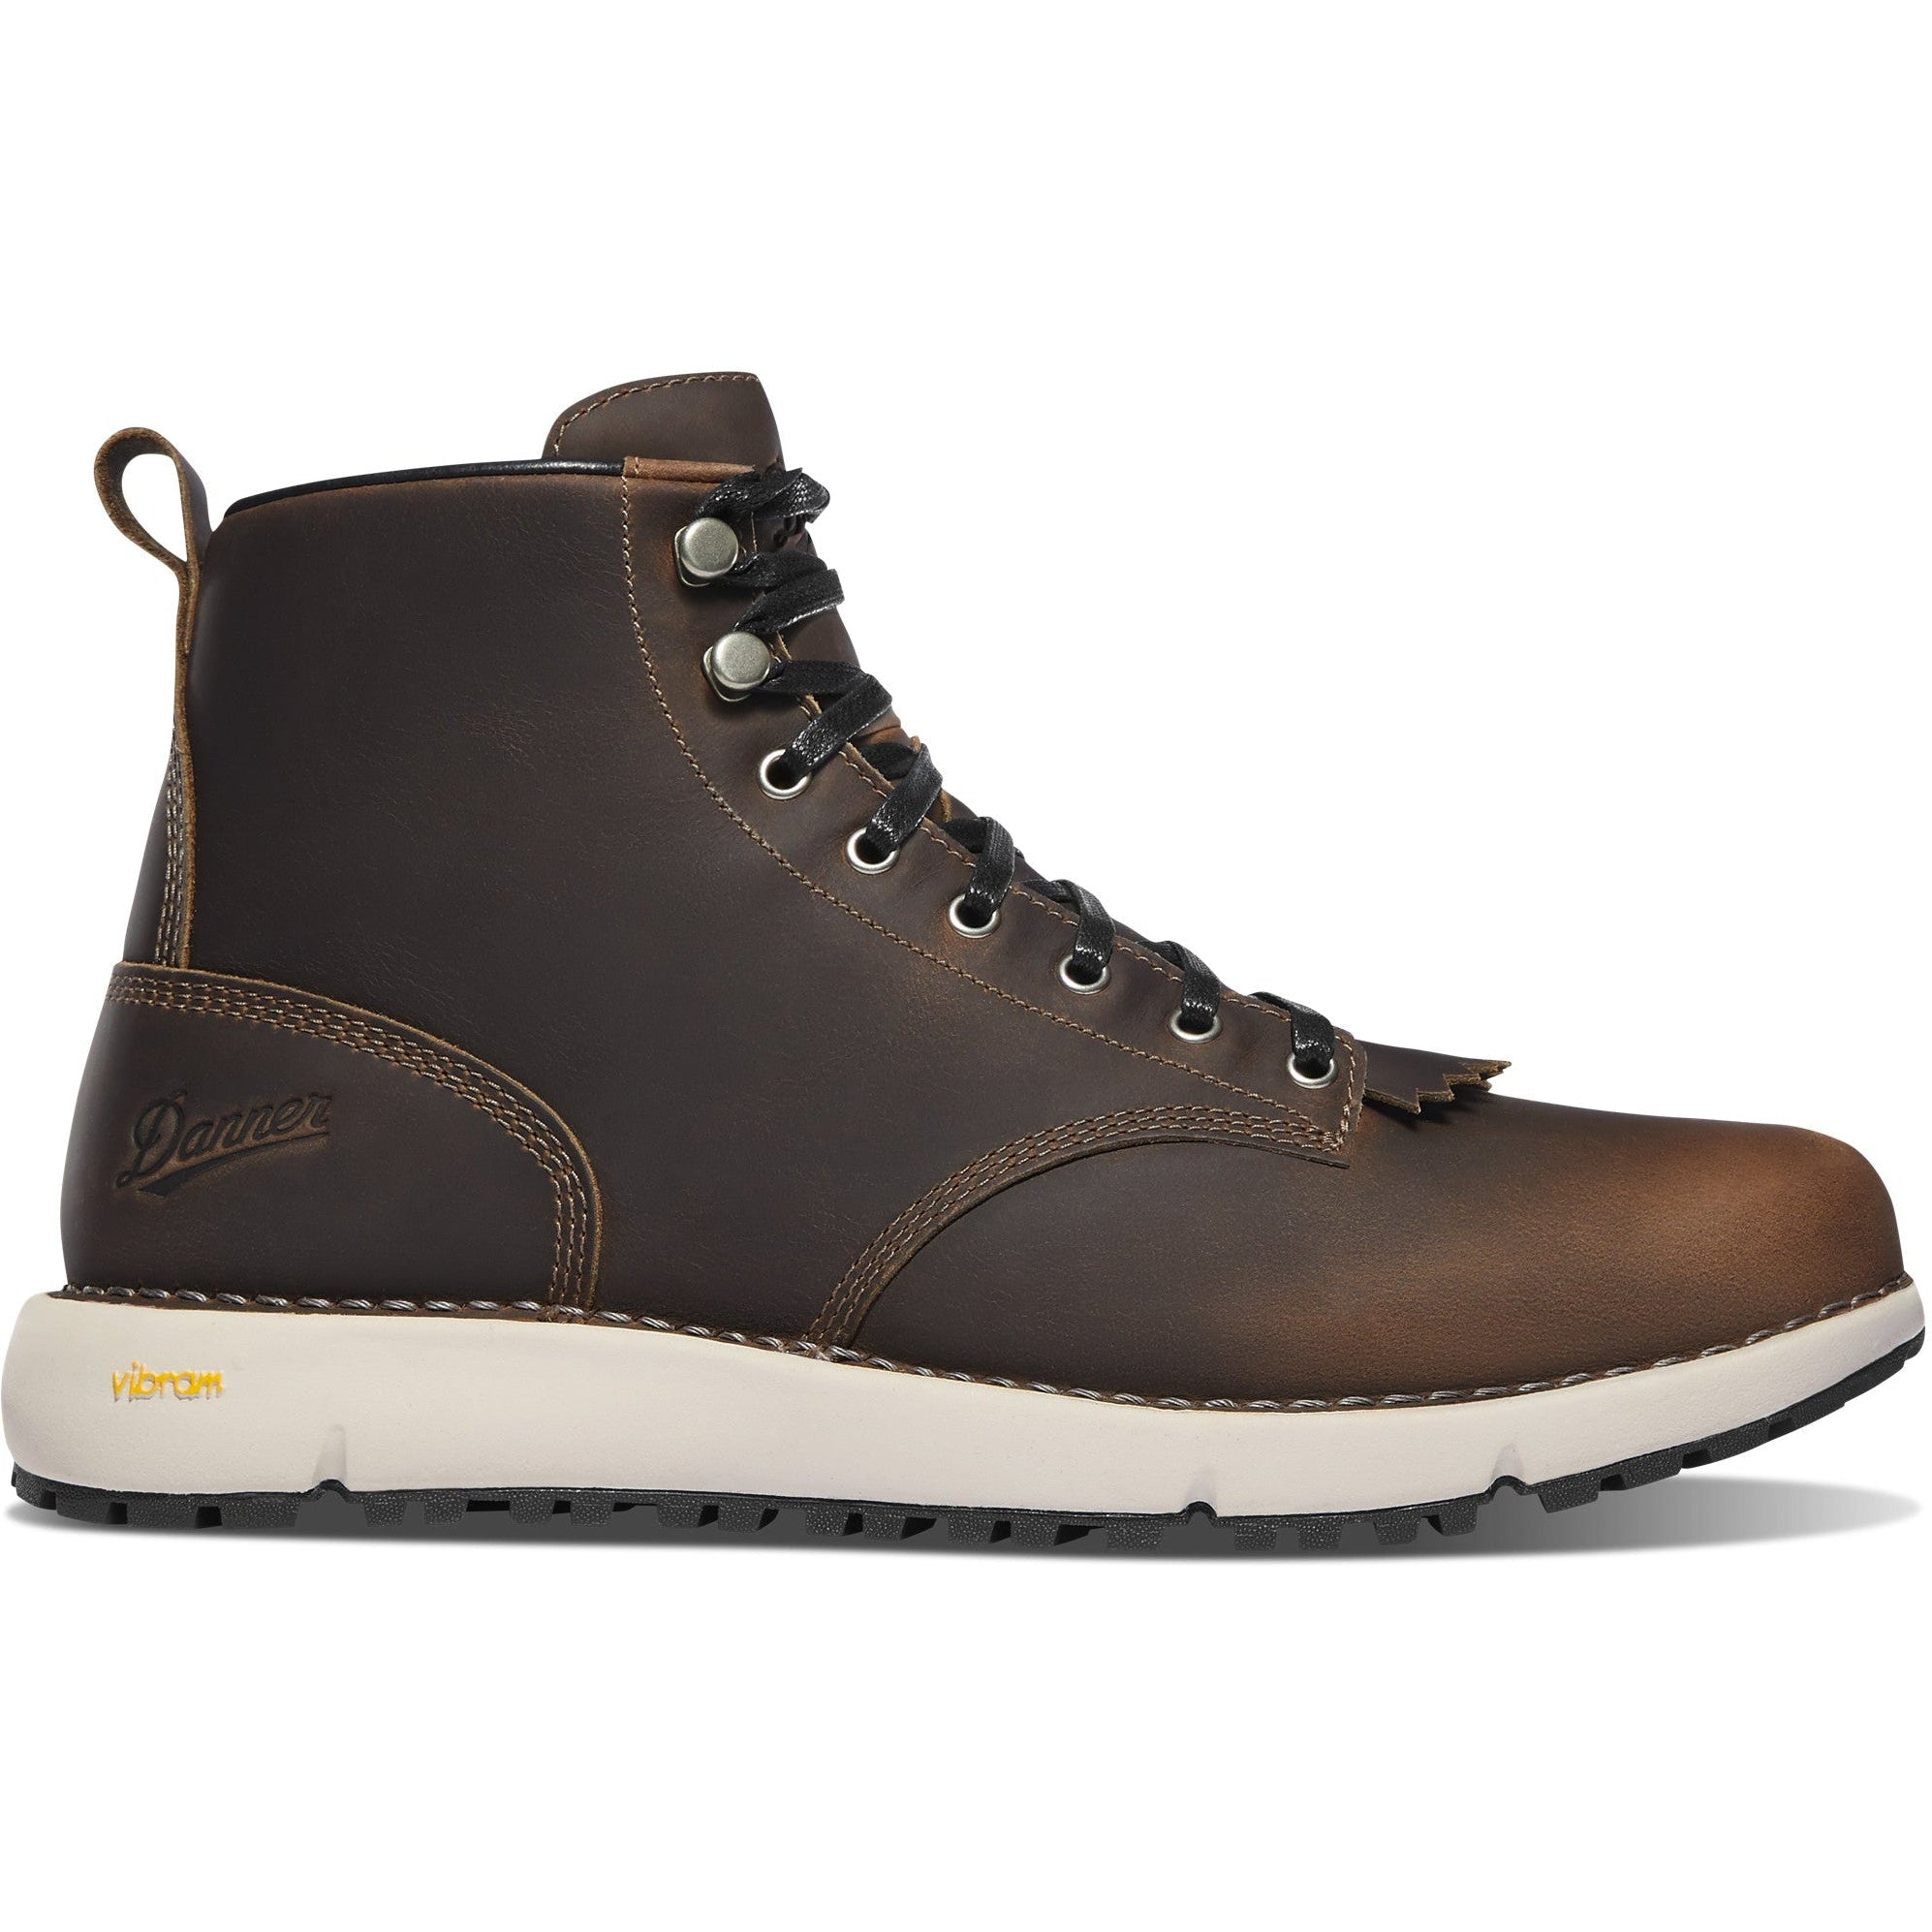 Danner Men's Logger 917 6" Classic Lifestyle Boot - Chocolate - 34650  - Overlook Boots